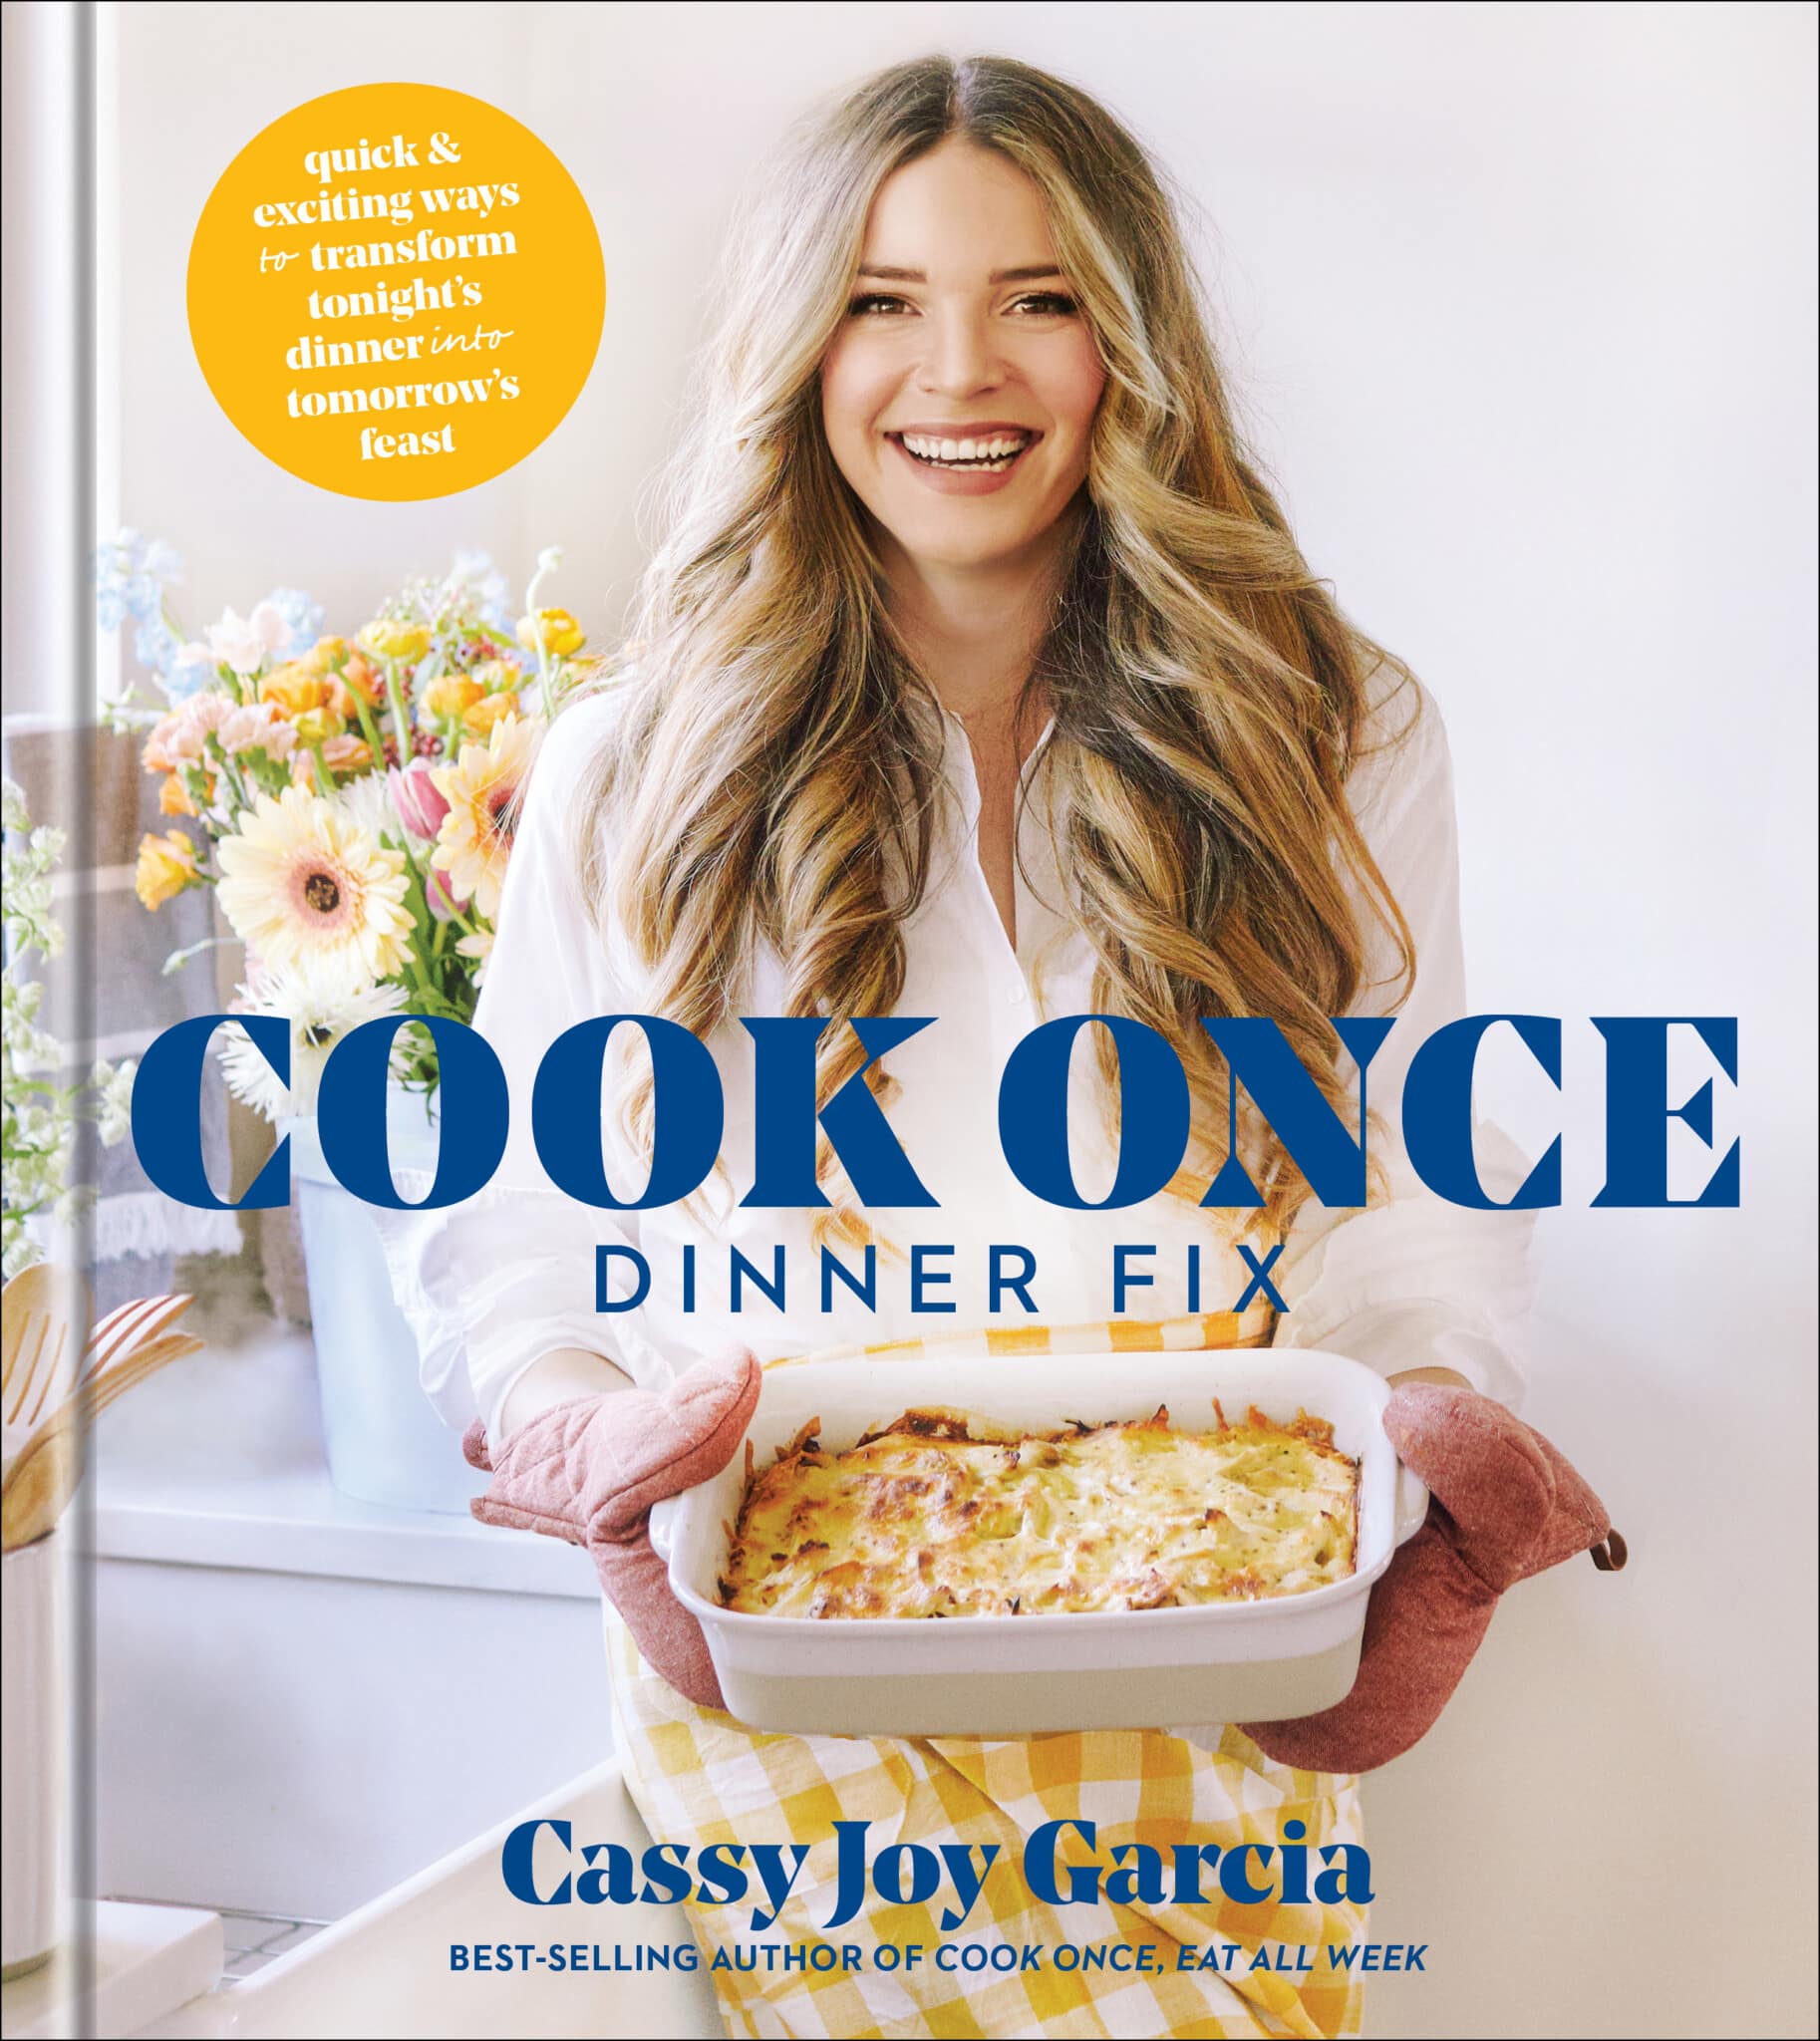 book cover with woman with light brown wavy hair in a white shirt holding a casserole dish with cook once dinner fix written in navy on the cover